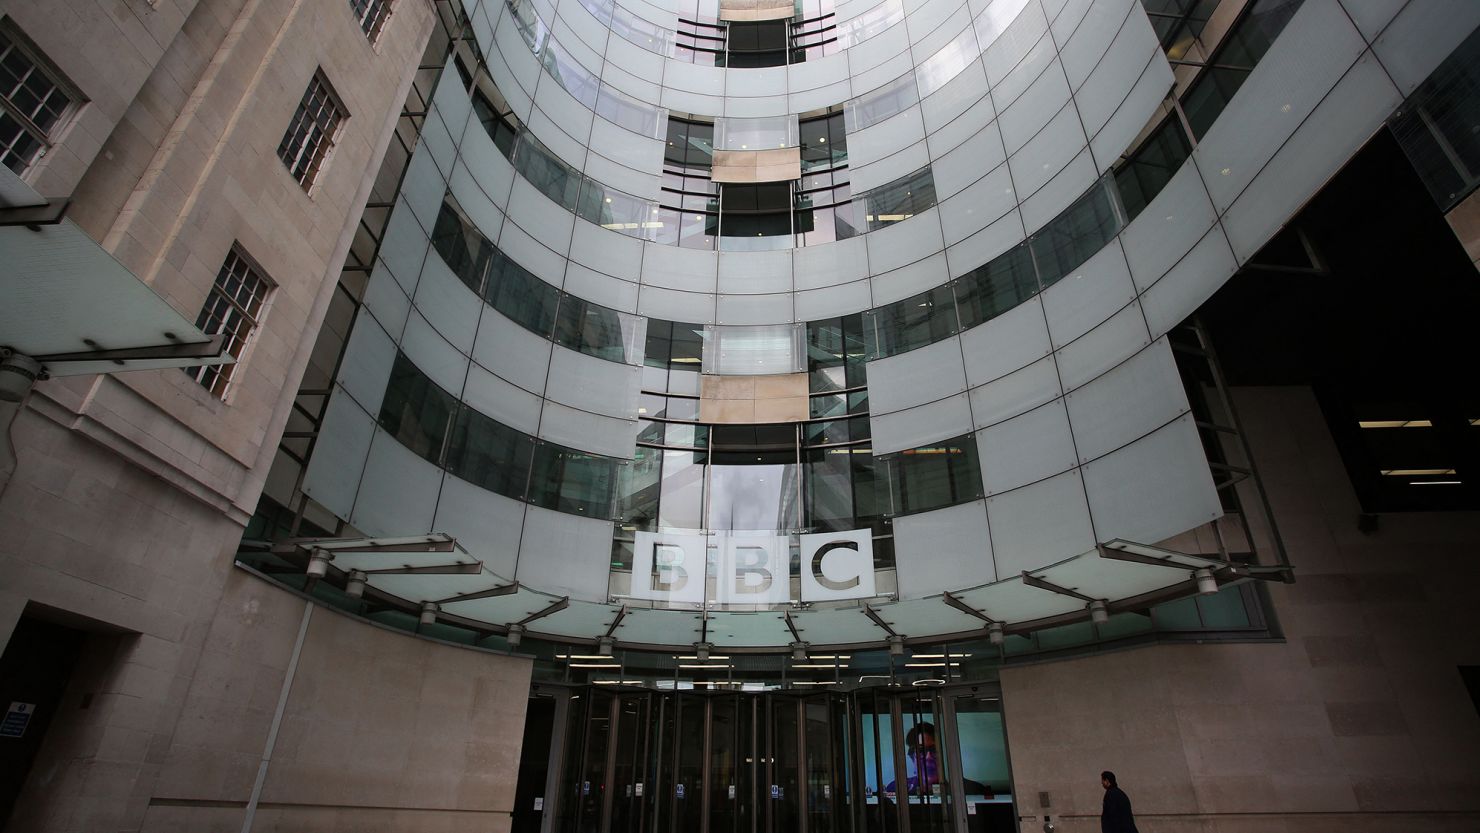 The BBC is among the organizations affected by the hack.